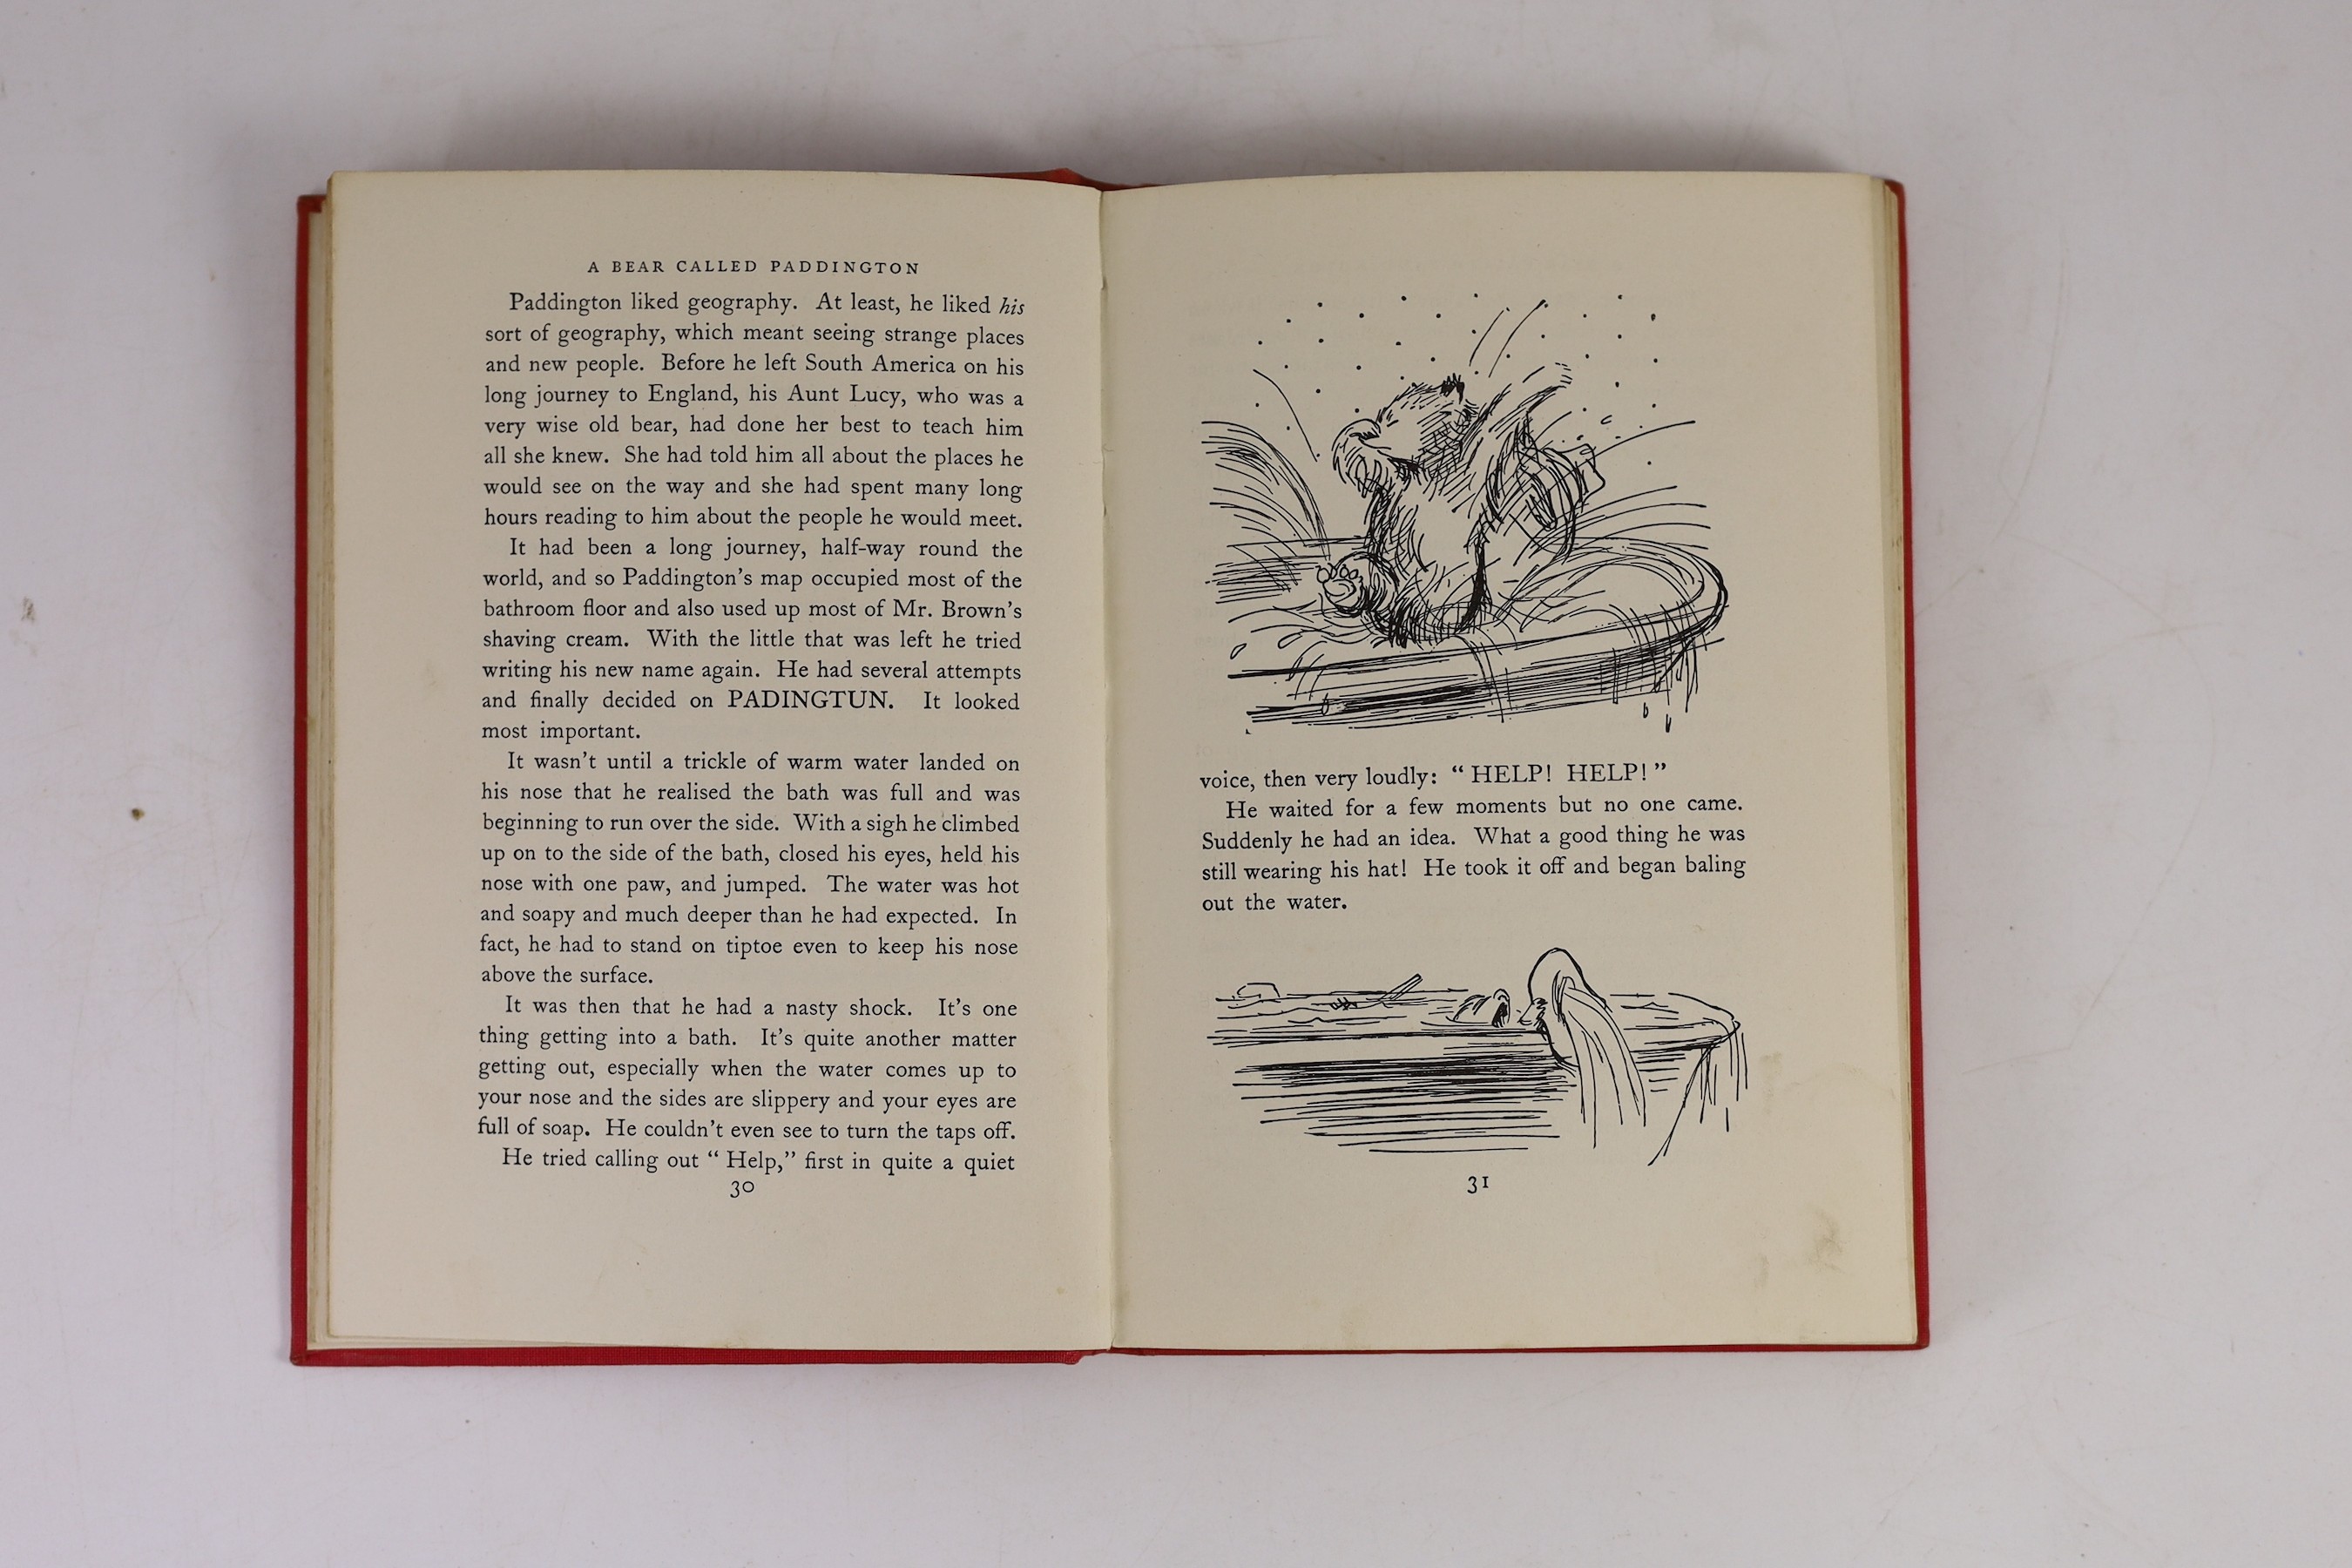 Bond, Michael - A Bear Called Paddington, 1st edition, illustrated by Peggy Fortnum, 8vo, cloth, Collins, London, 1958